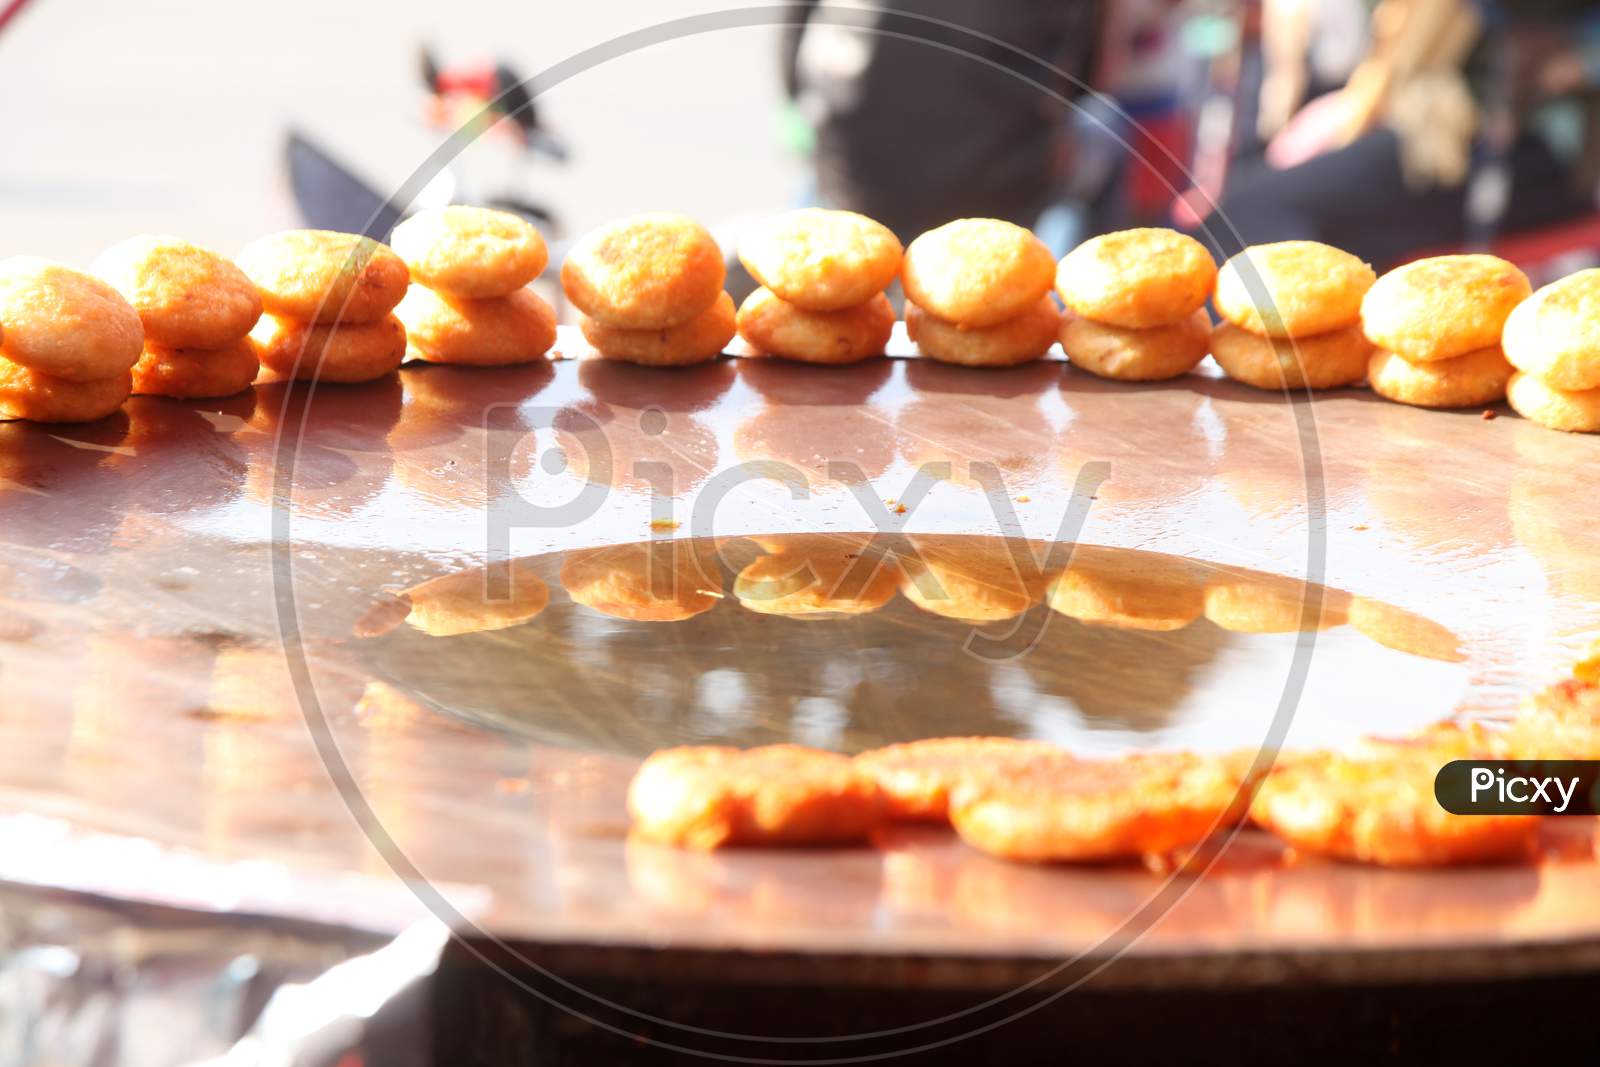 Selective focus on Samosa's with people in the background